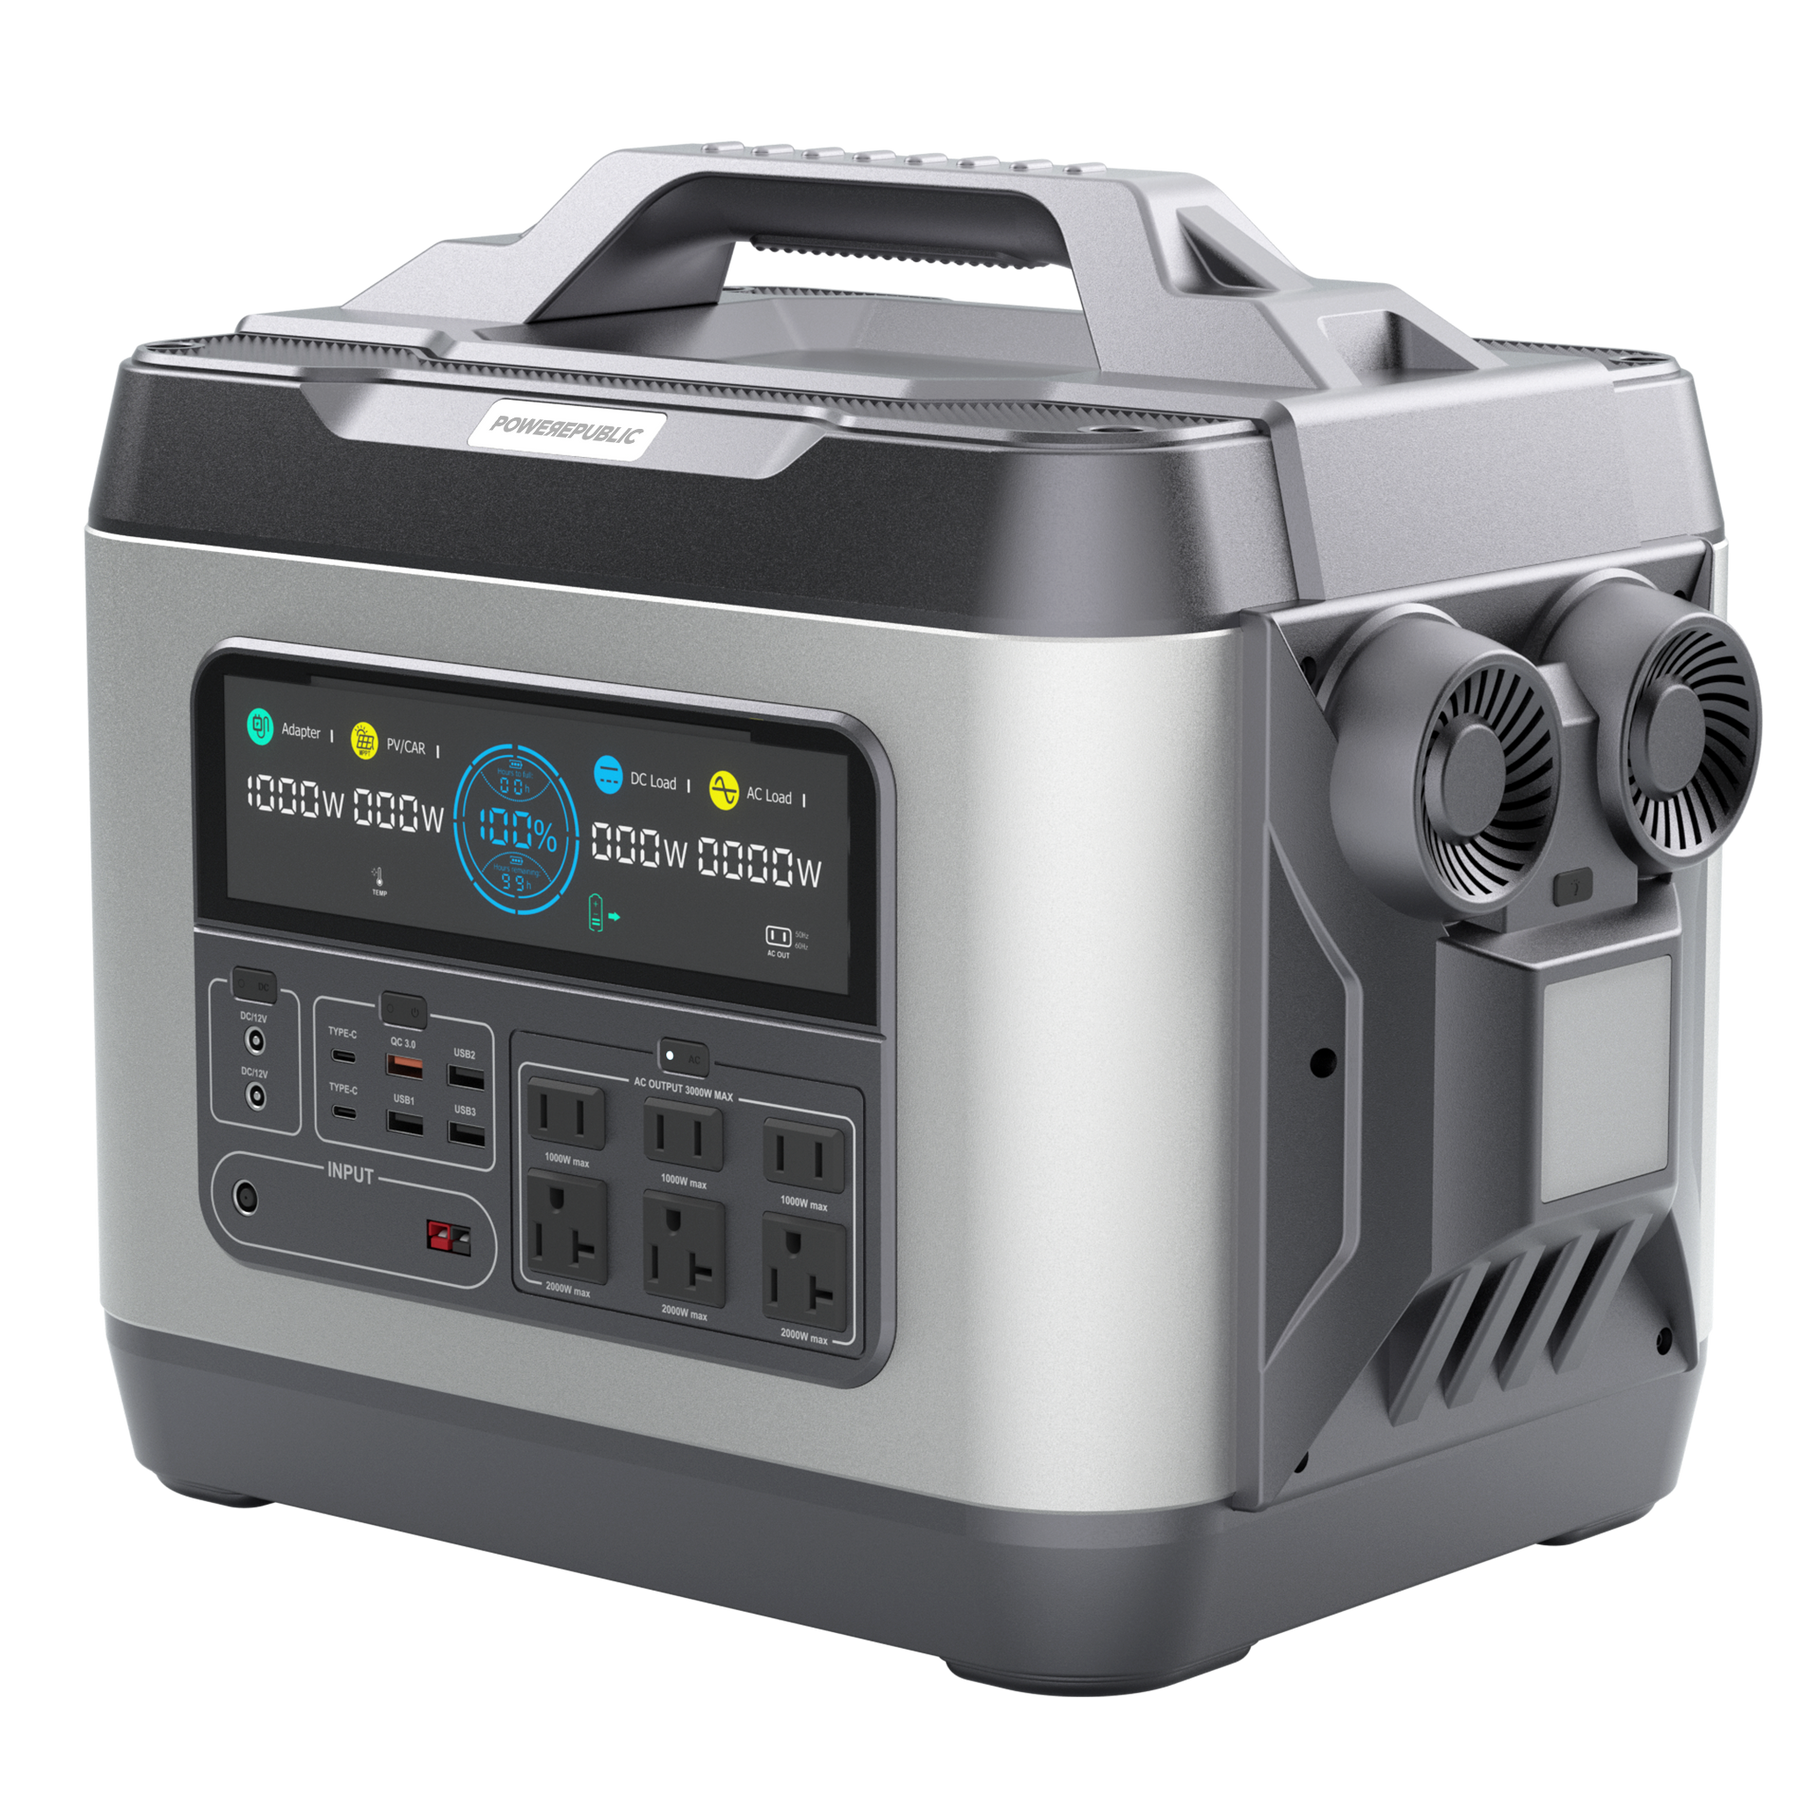 POWEREPUBLIC T3000 portable power station, 3000W 3200Wh, metallic gray aluminum-alloy body with turbine-engine design, an LED Light, a handle, an LCD screen, and input and output ports.